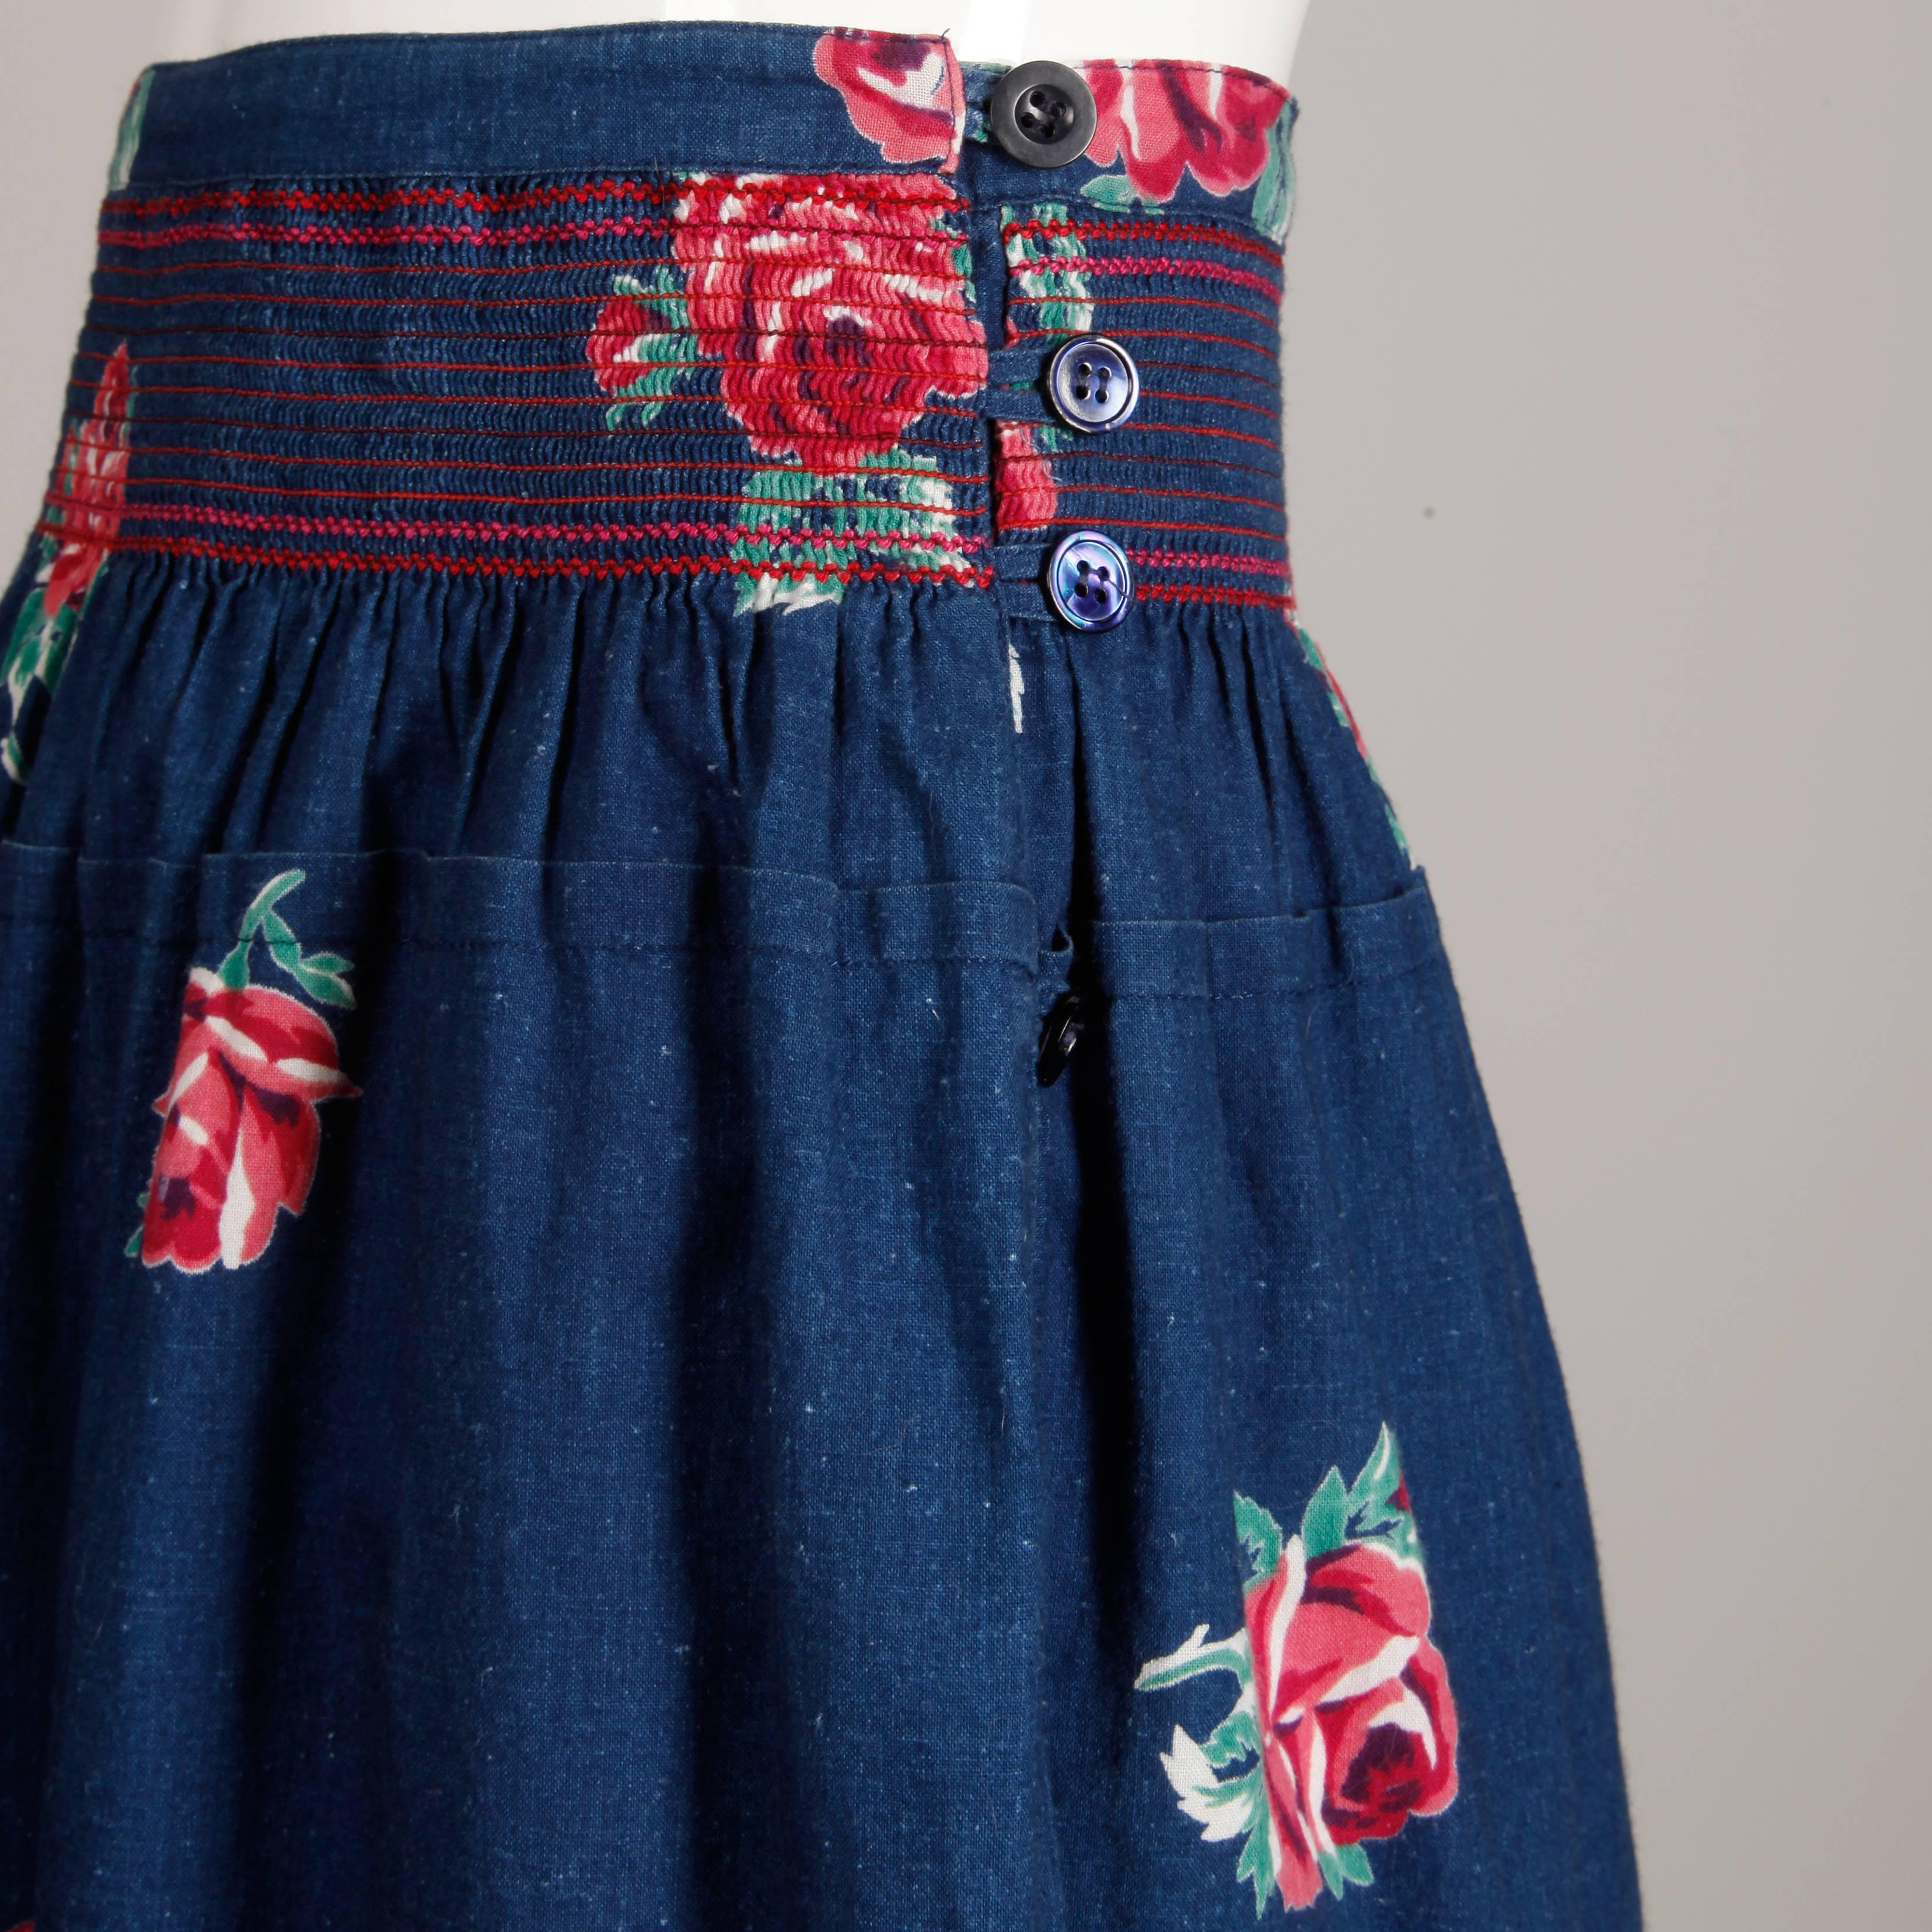 Women's 1970s Kenzo Vintage Blue Denim Chambray Jeans Skirt with Floral Rose Print For Sale